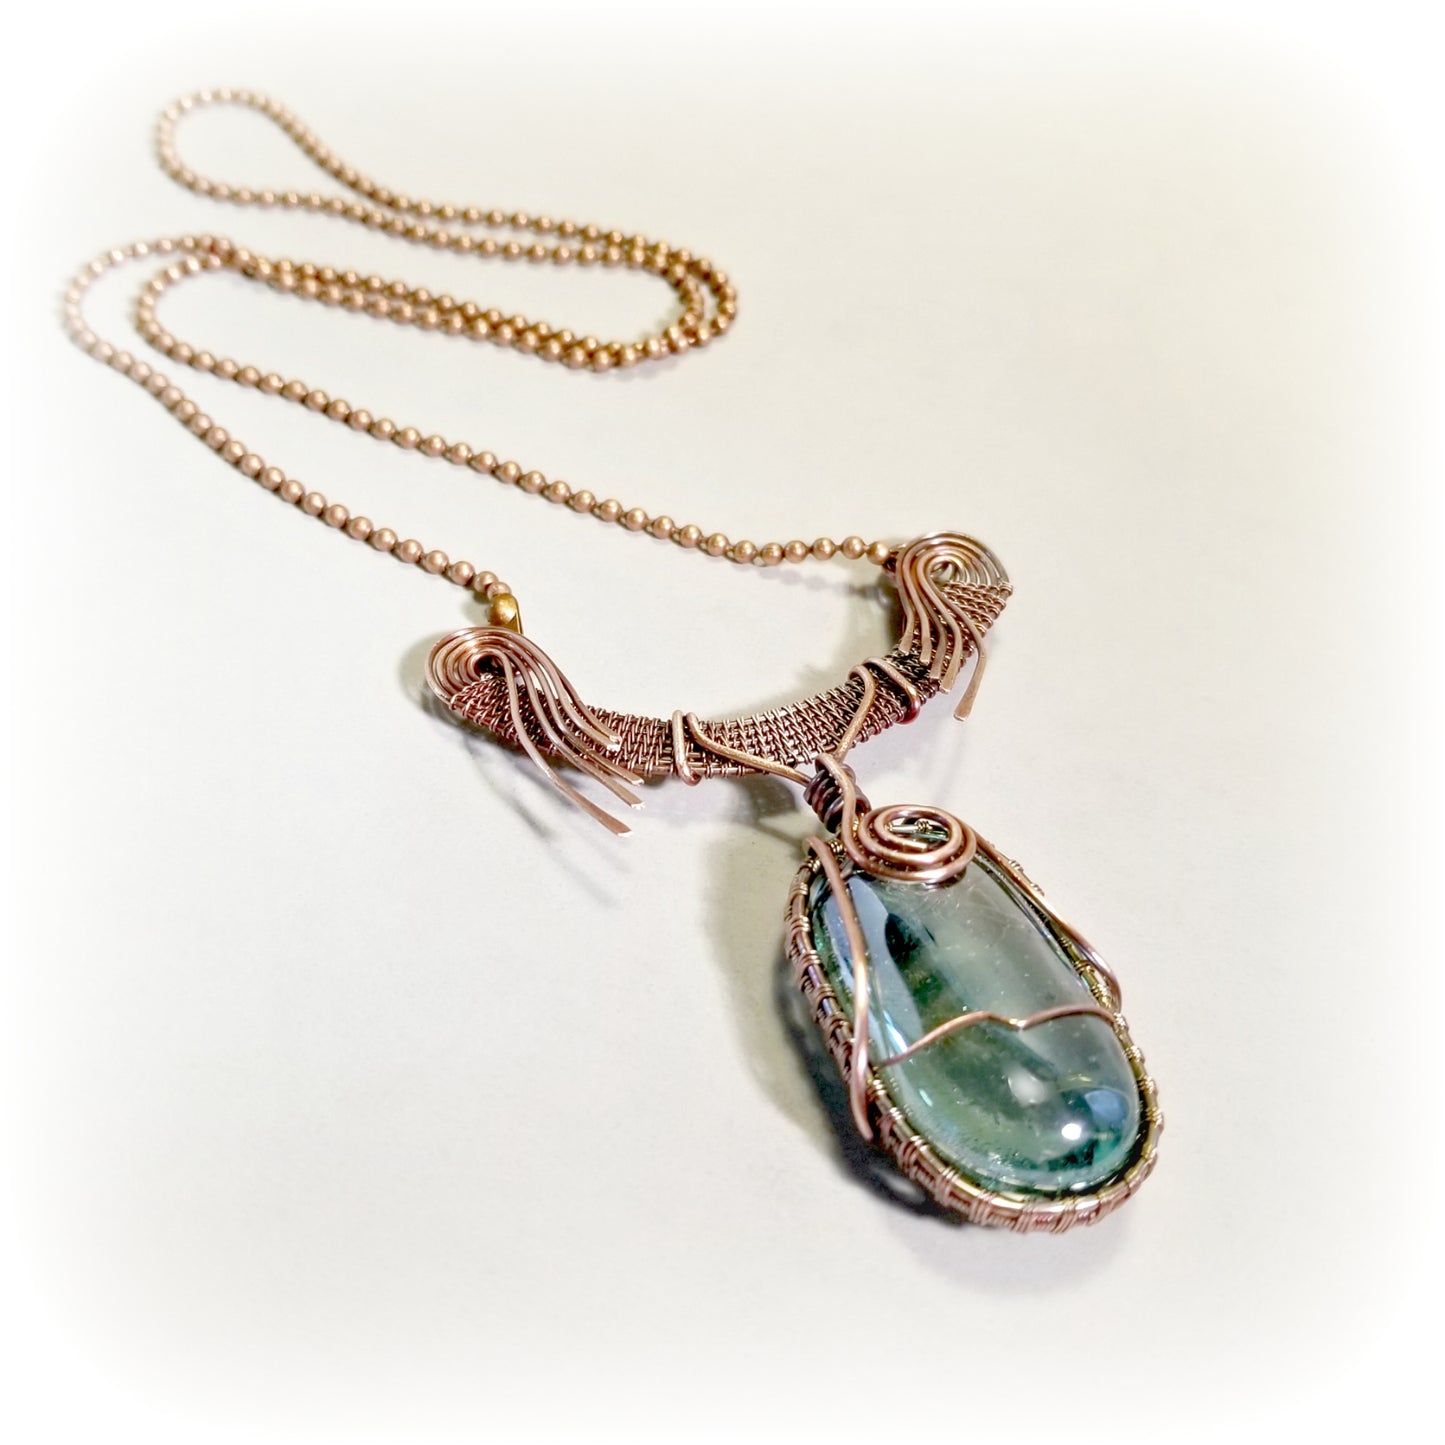 "Something Blue" Wire Wrapped Necklace, Jewelry for Women